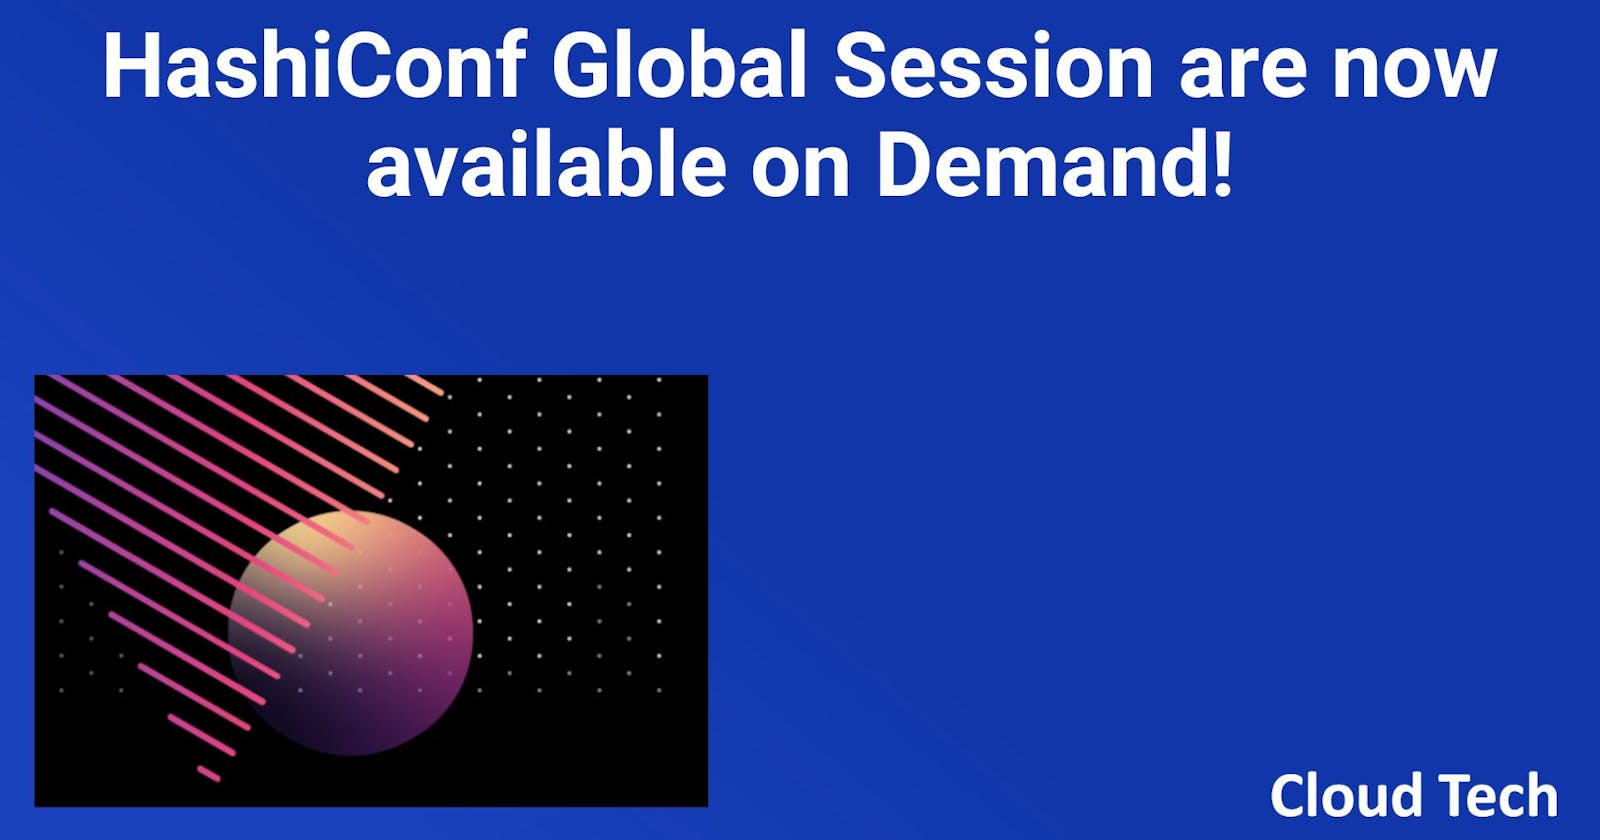 HashiConf Global Session are now available on Demand!